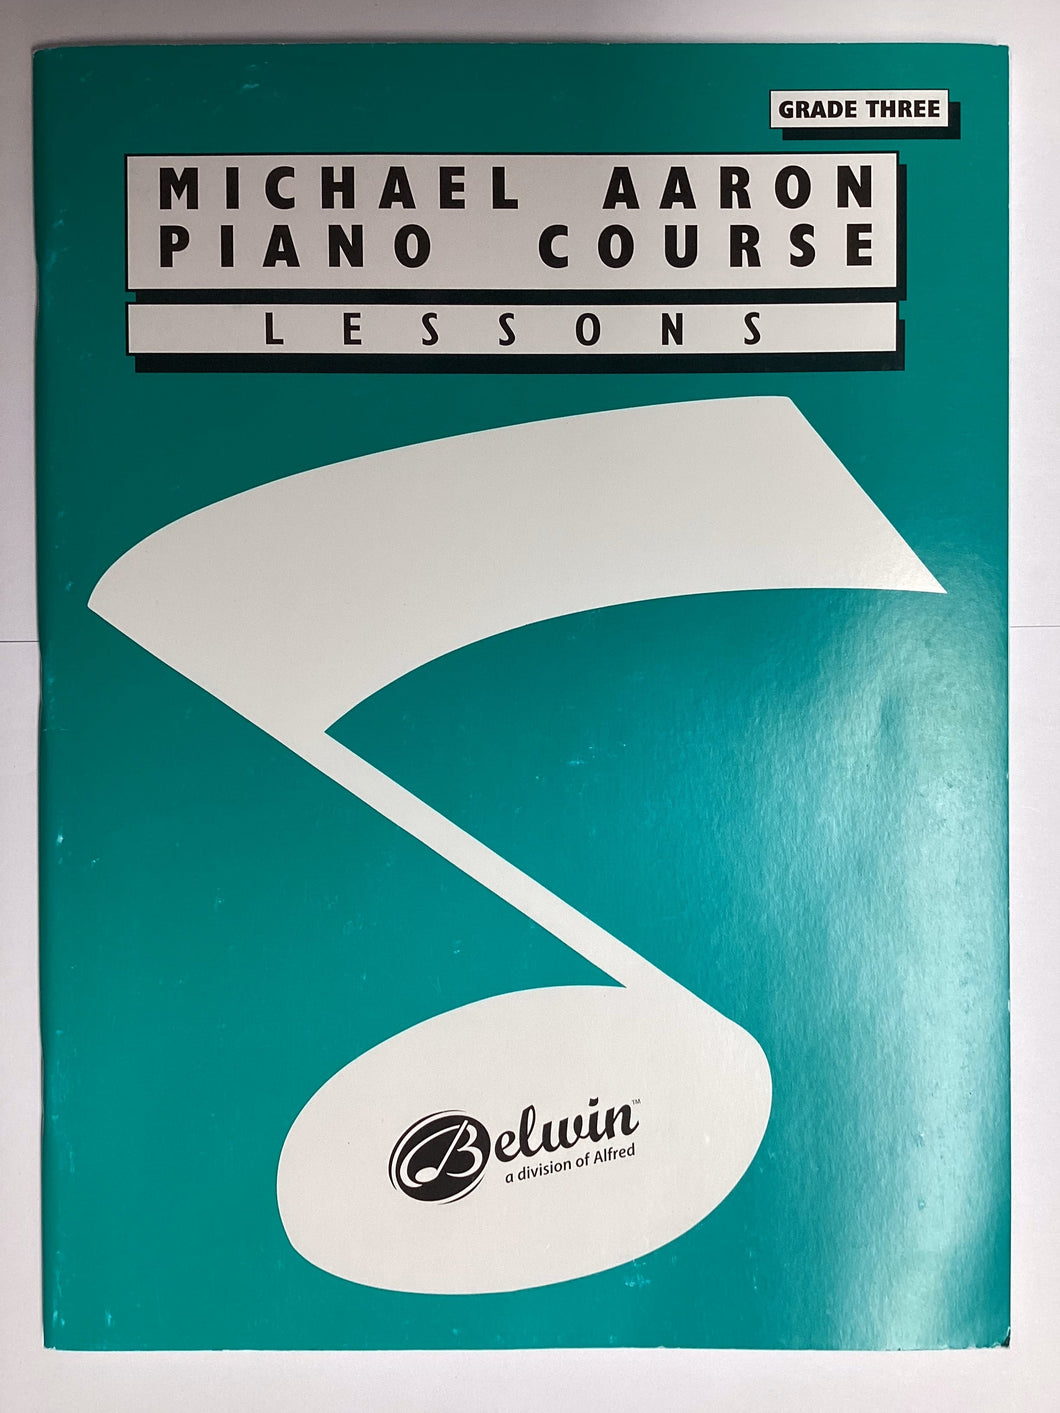 Michael Aaron Piano Course Lessons - Grade 3